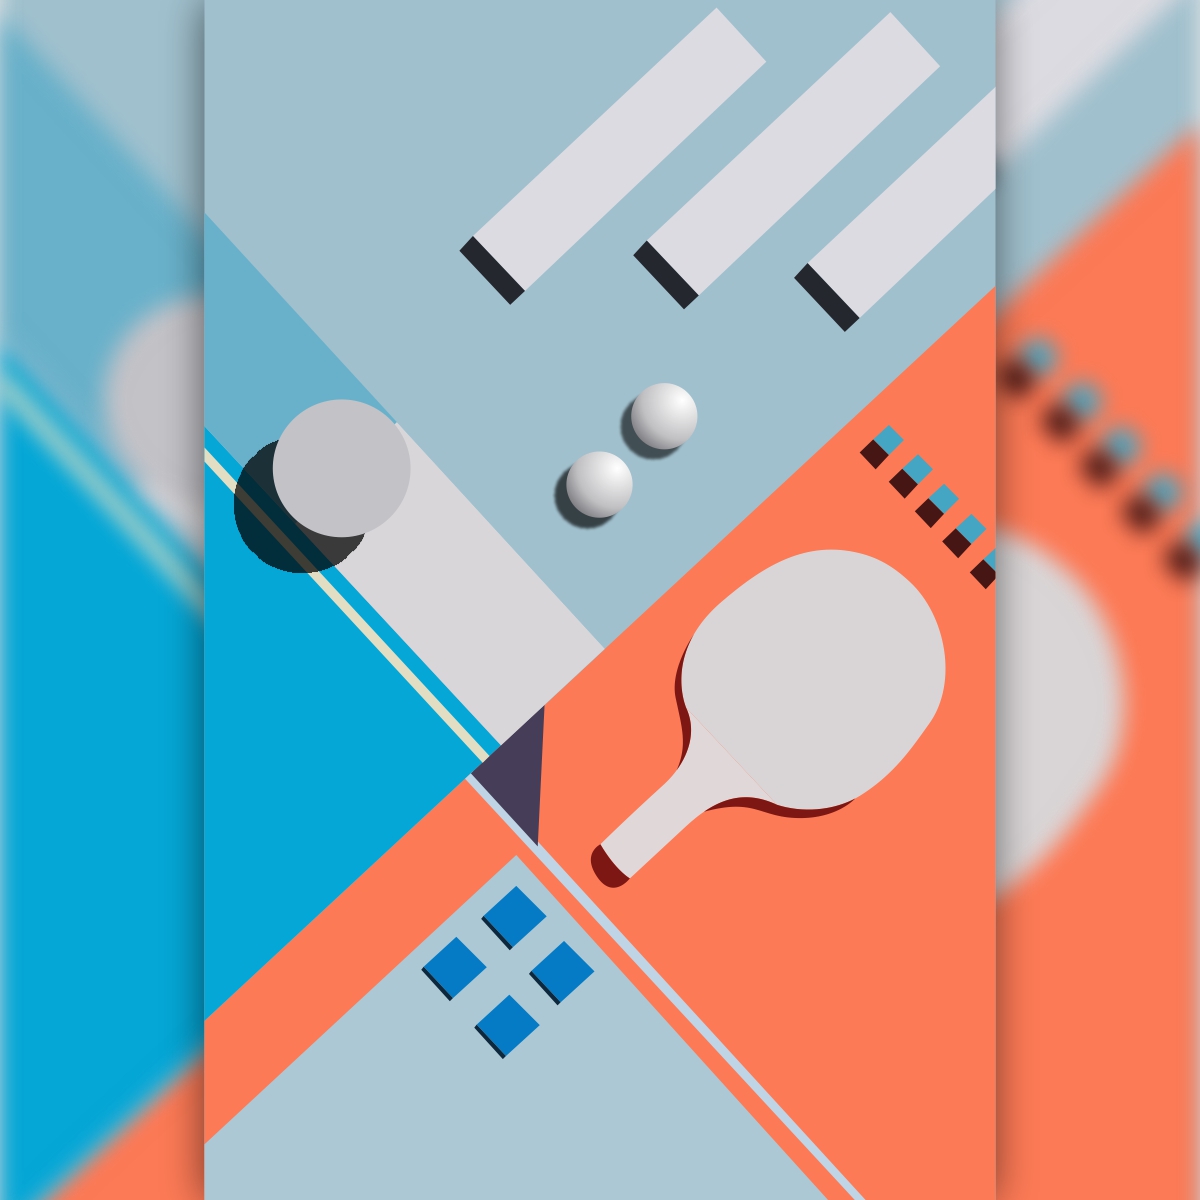 Free table tennis Vector File